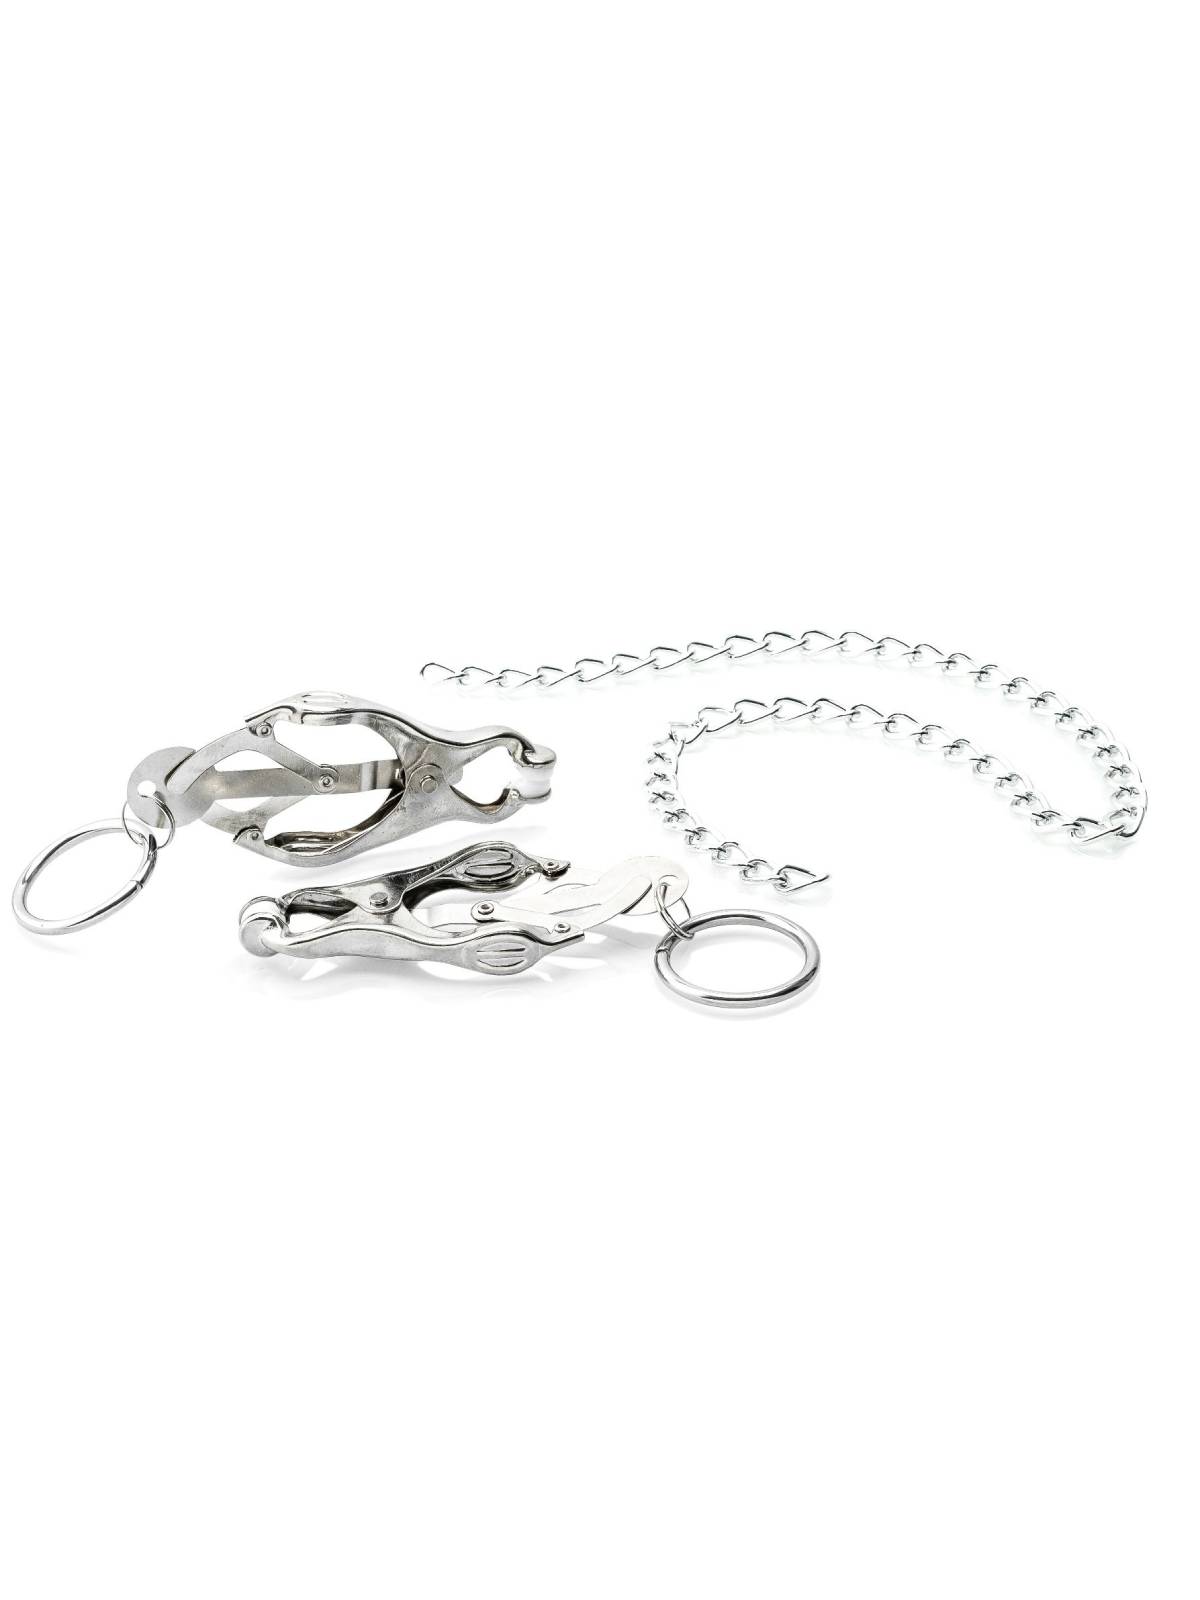 Zenn Japanese Clover Clamps with Chain | 40 cm